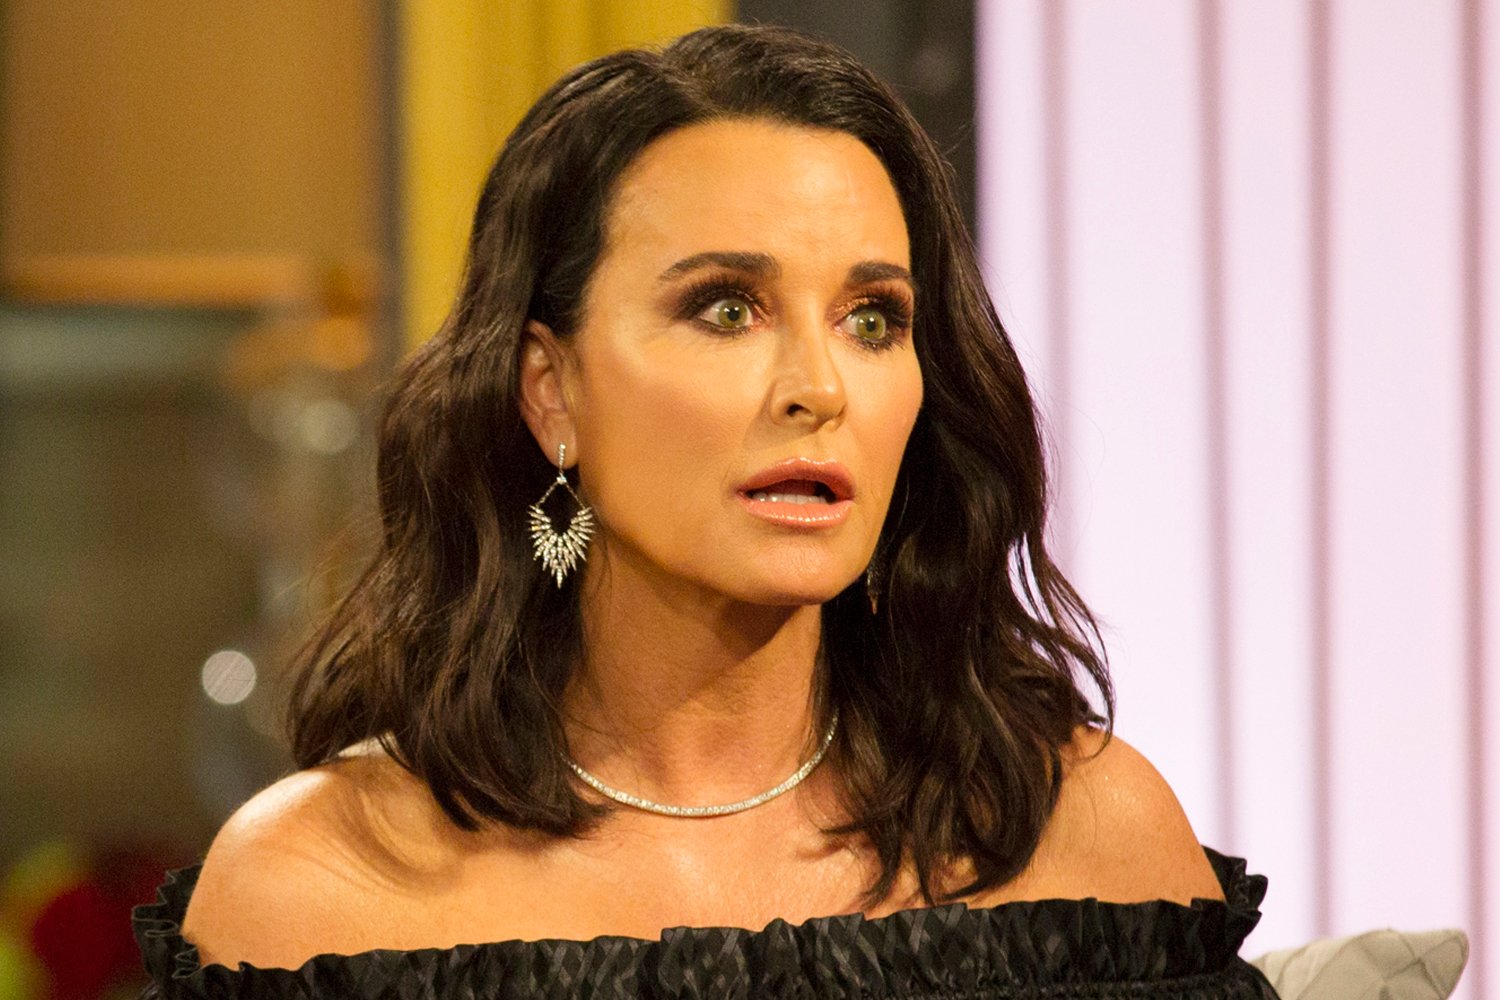 Kyle Richards looking surprised during the 'RHOBH' reunion